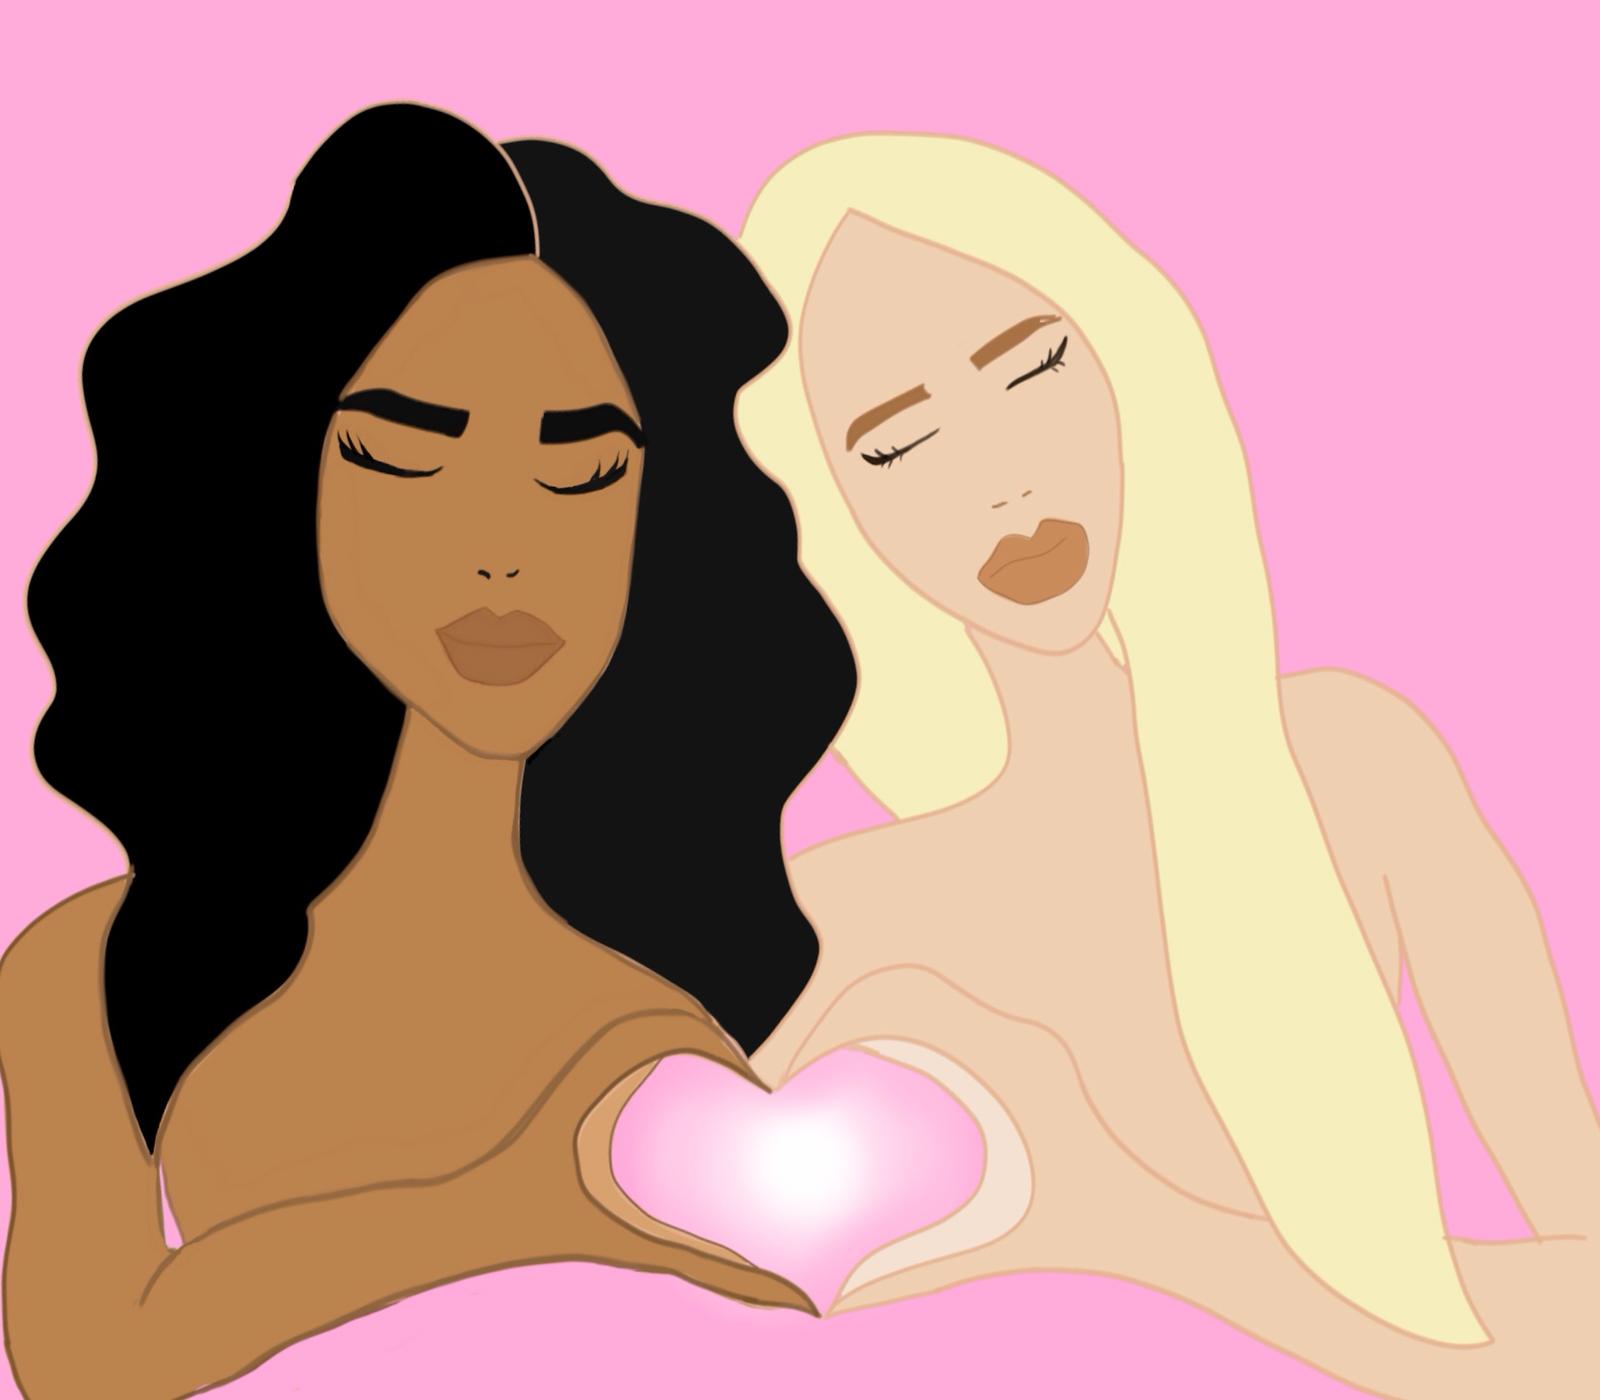 Yes Gurl illustration of two girls making friends